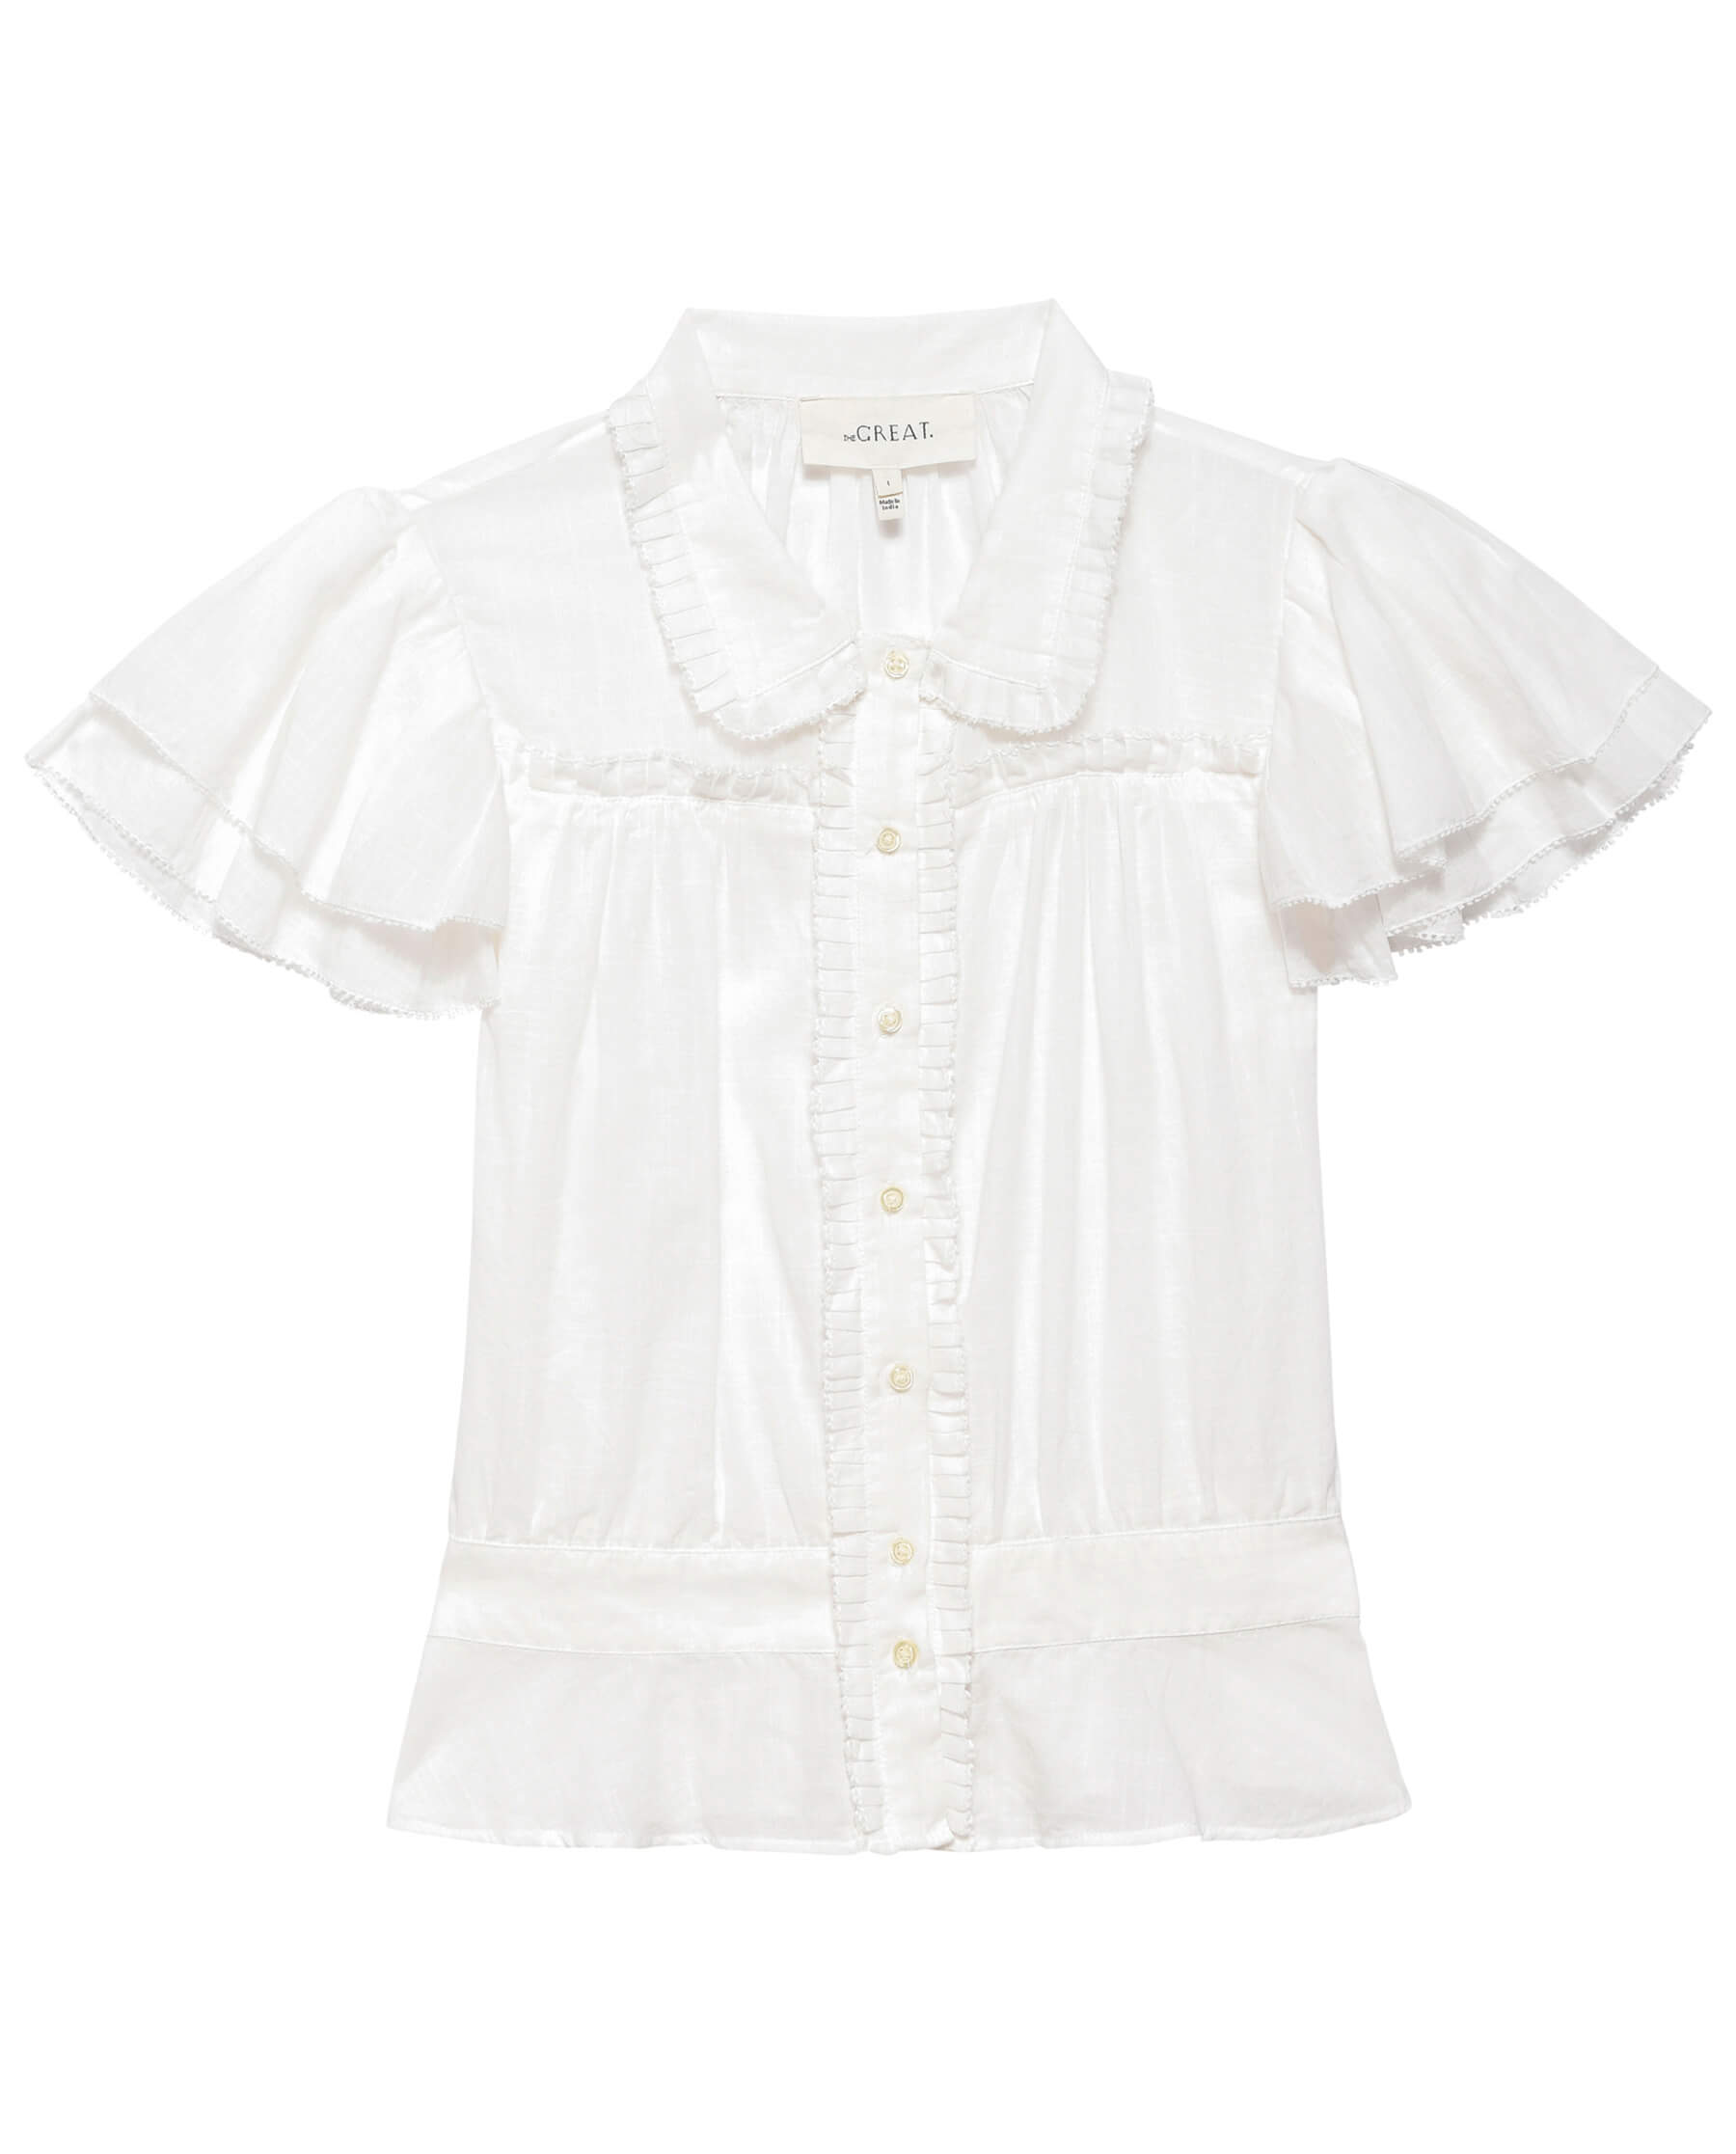 The Gardenia Top. -- White SHIRTS THE GREAT. PS24 SALE